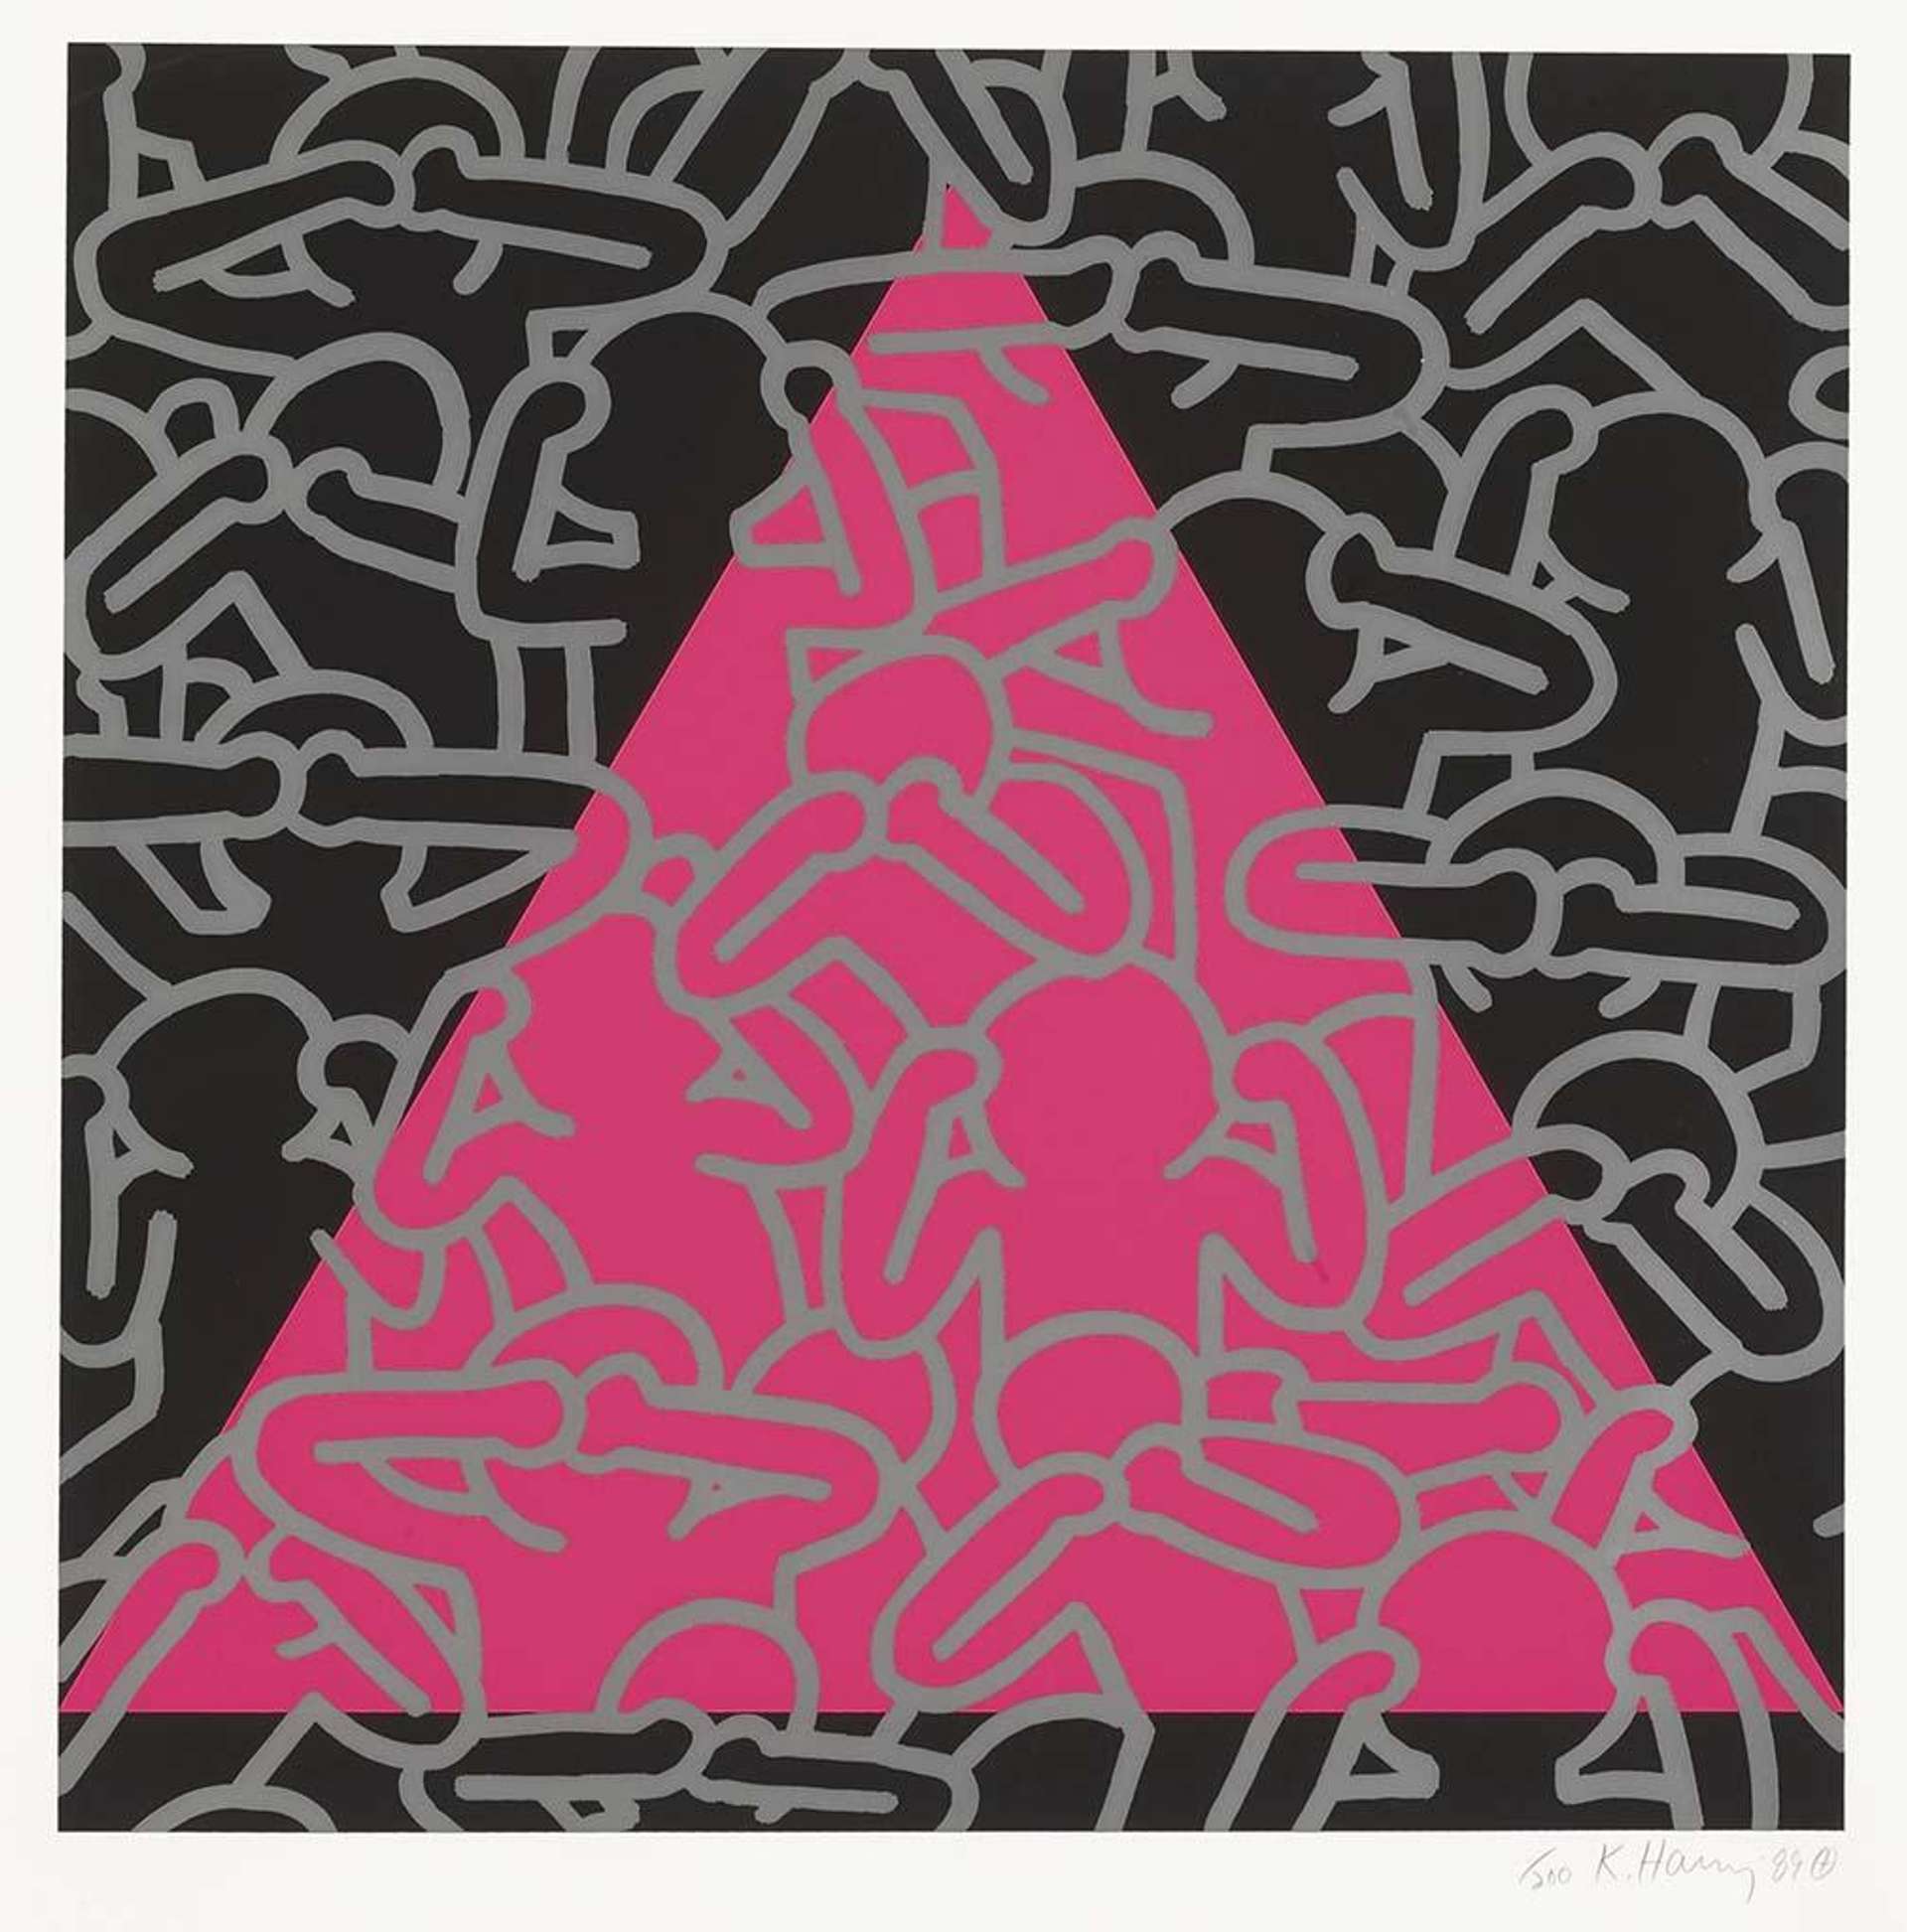 This print by Keith Haring shows a mass of interconnected, line-drawn figures in silver reflective ink over a florescent pink triangle.